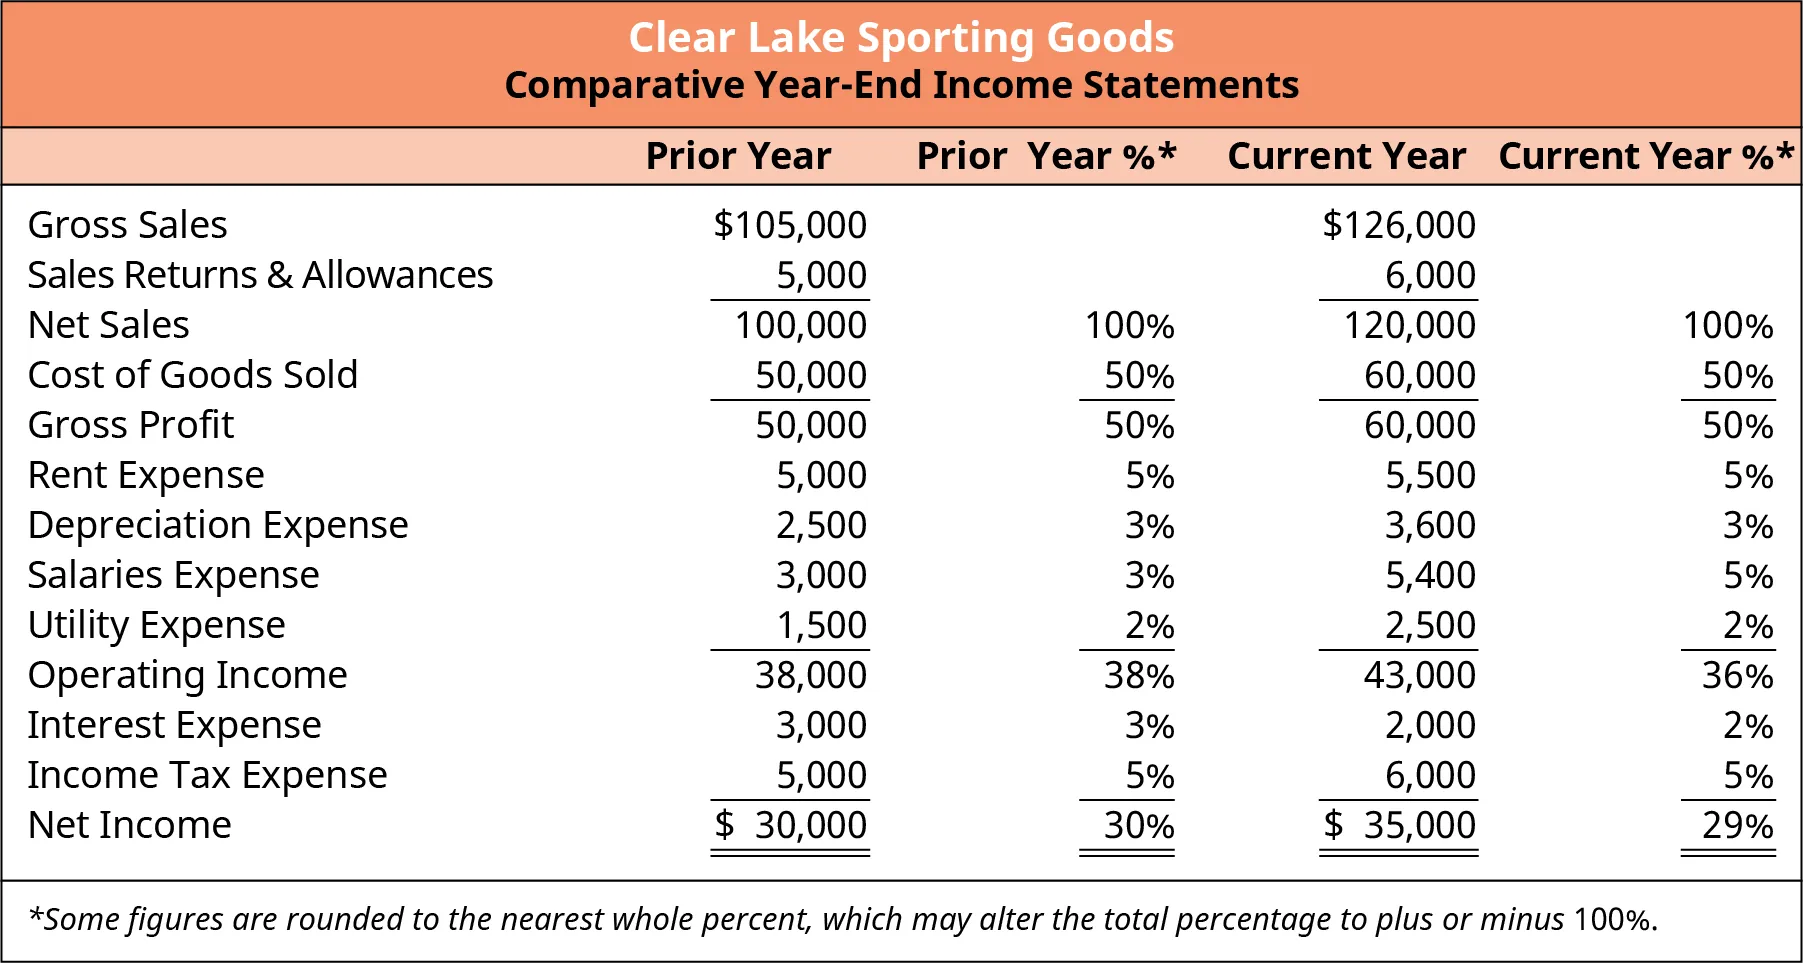 A comparative common size year-end income statement for Clear Lake Sporting Goods shows gross sales, sales returns and allowances, net sales, cost of goods sold, gross profit, the company's expenses, and net income for the prior and current year. Each line item except for gross sales and sales returns and allowances is represented as both a dollar figure and a percent of the total assets or liabilities.